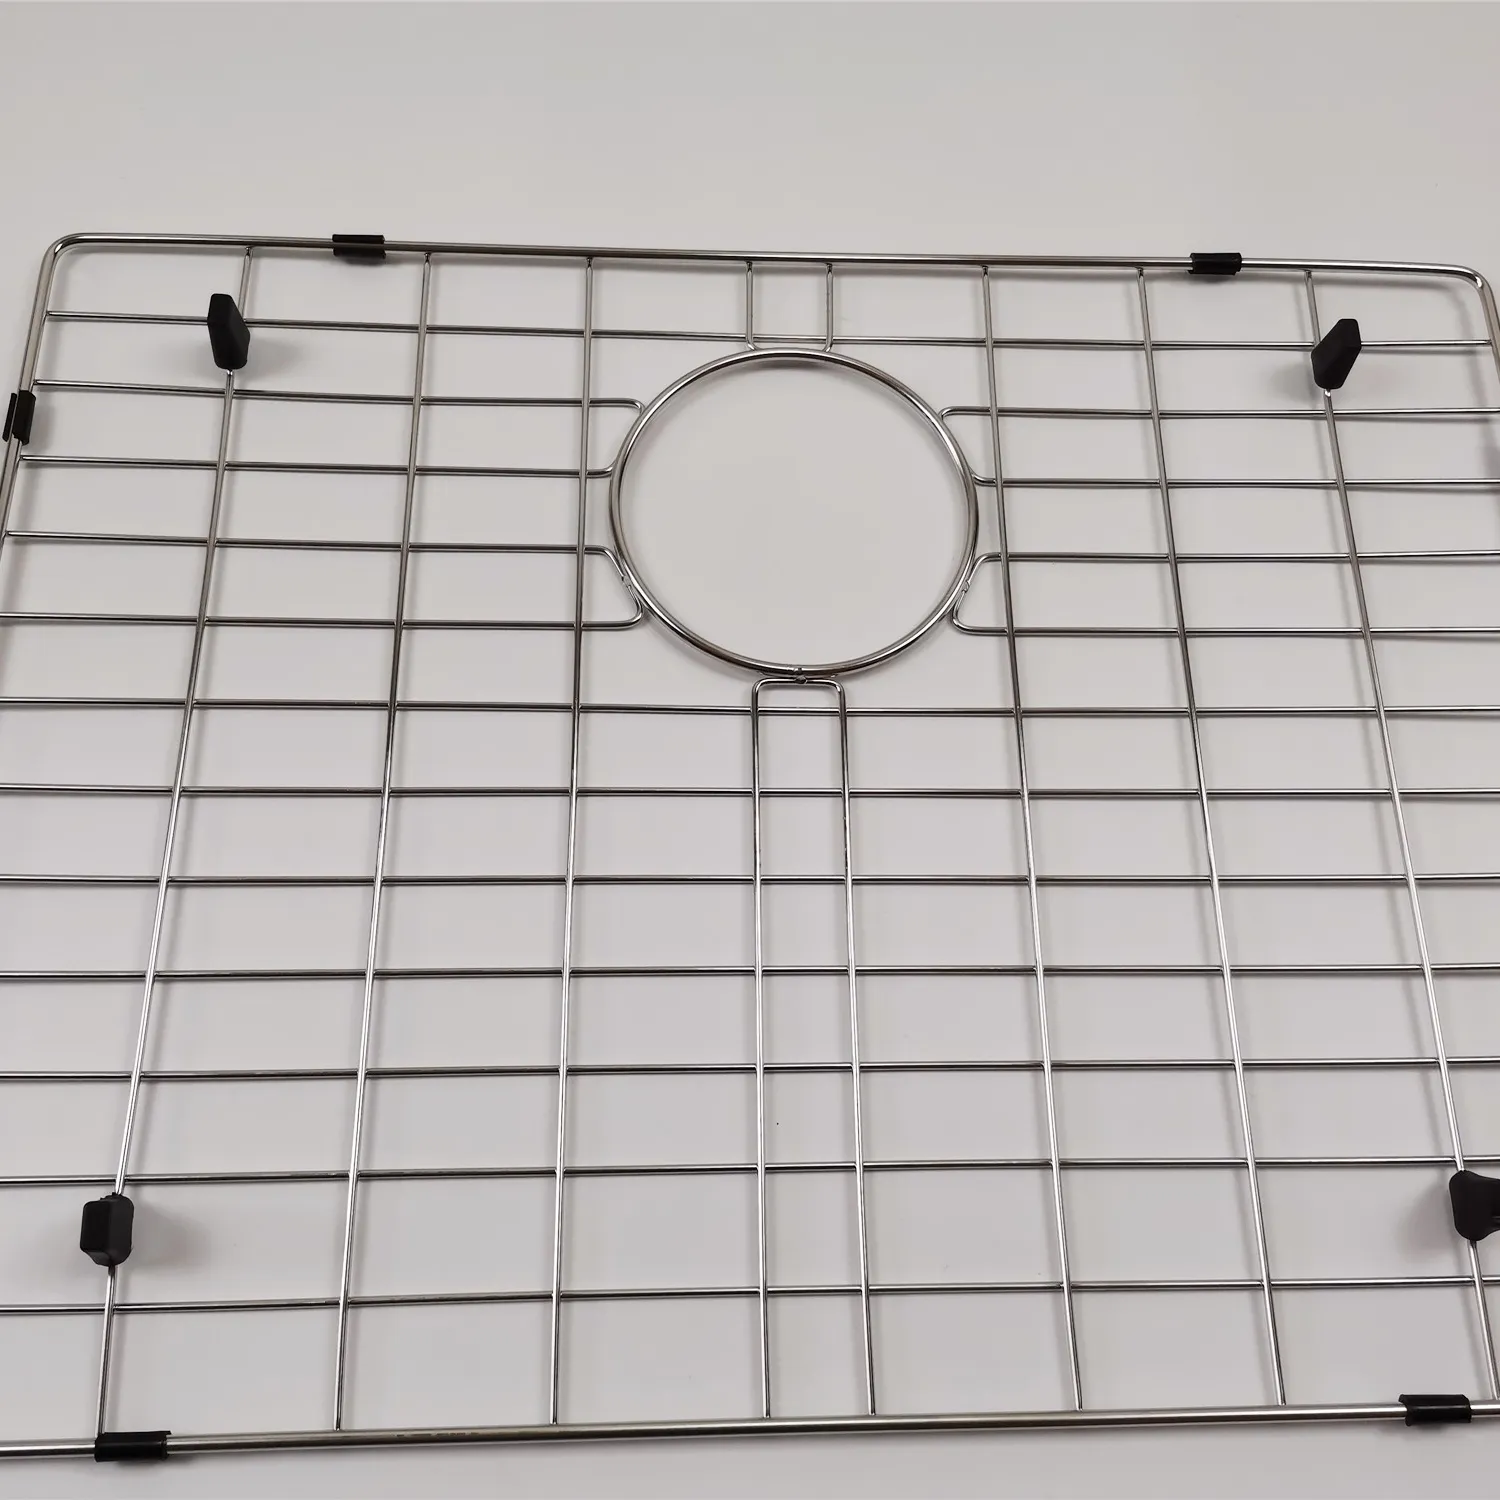 Kitchen Sink Grid Protectors Bottom Stainless Steel With Rear Drain Hole